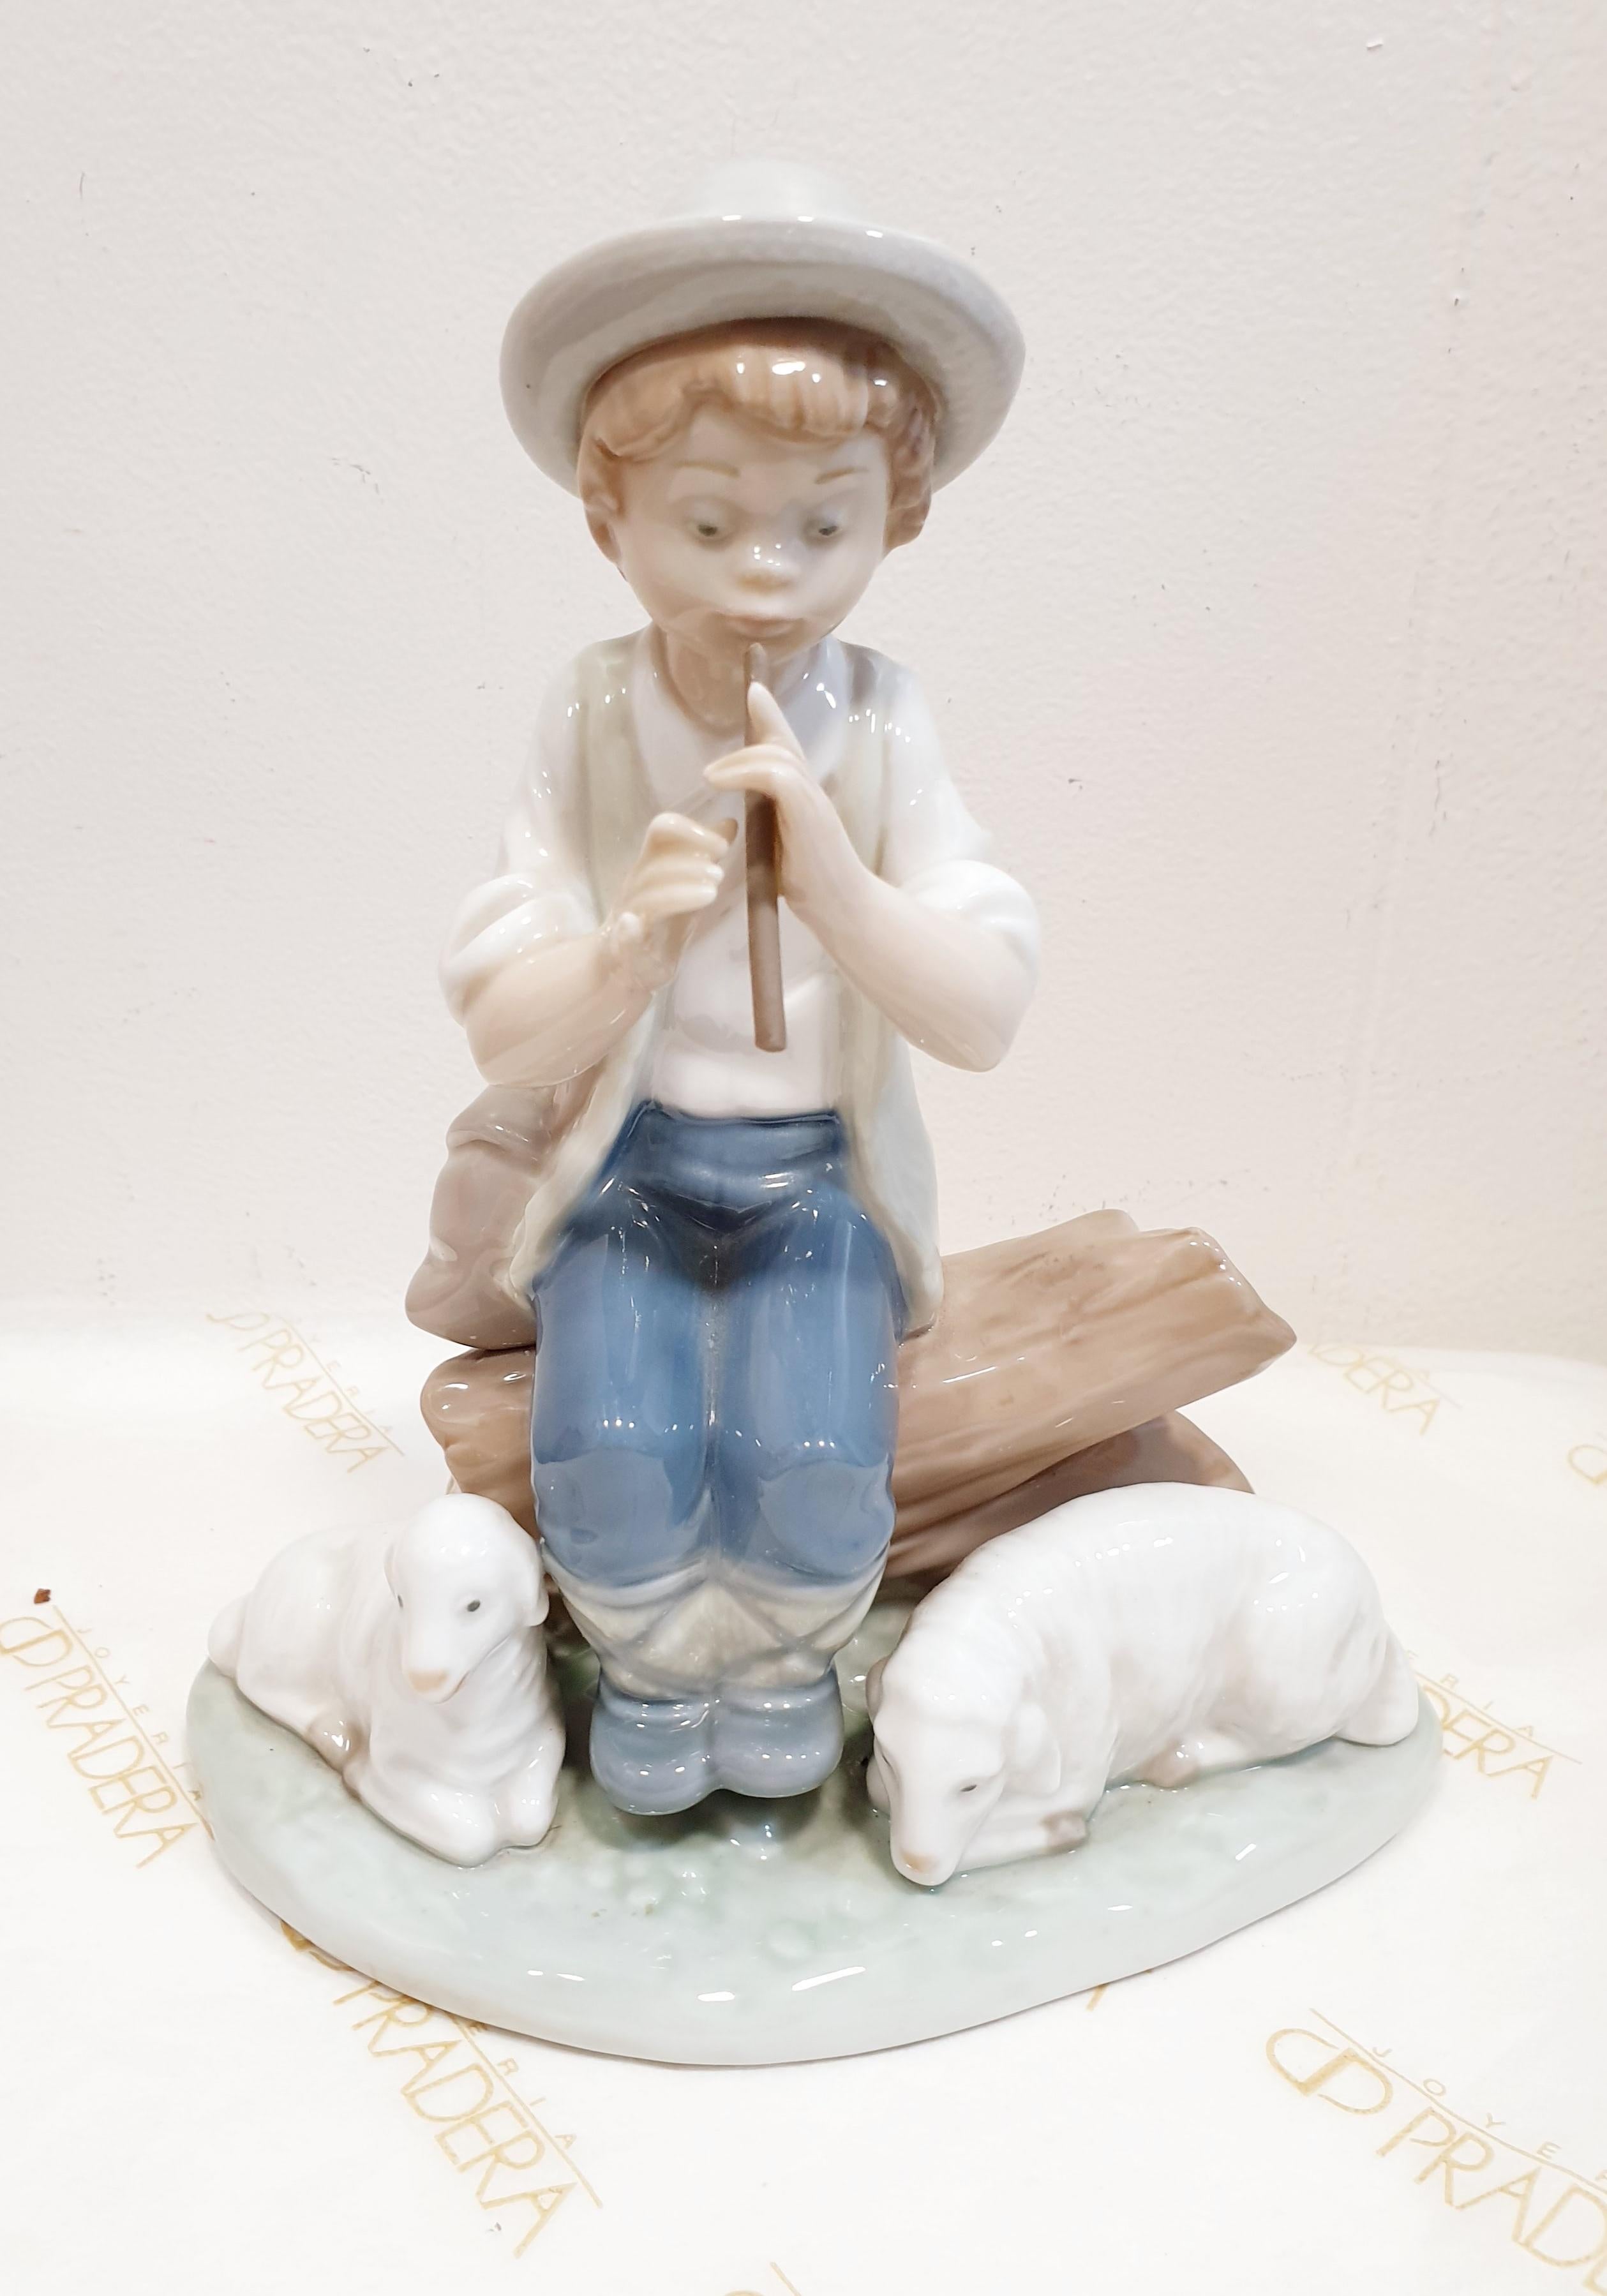 NAO BY LLADRÓ Porcelain Shepherd Boy With Sheep. Hand Made In Spain. Schaapsherder Met Schapen. Lamman Poika. Collectible Figurine Nao Boy.

THE WORLD LLADRO
A story of passion for porcelain
Founded in 1953, Lladró is a world leading brand in